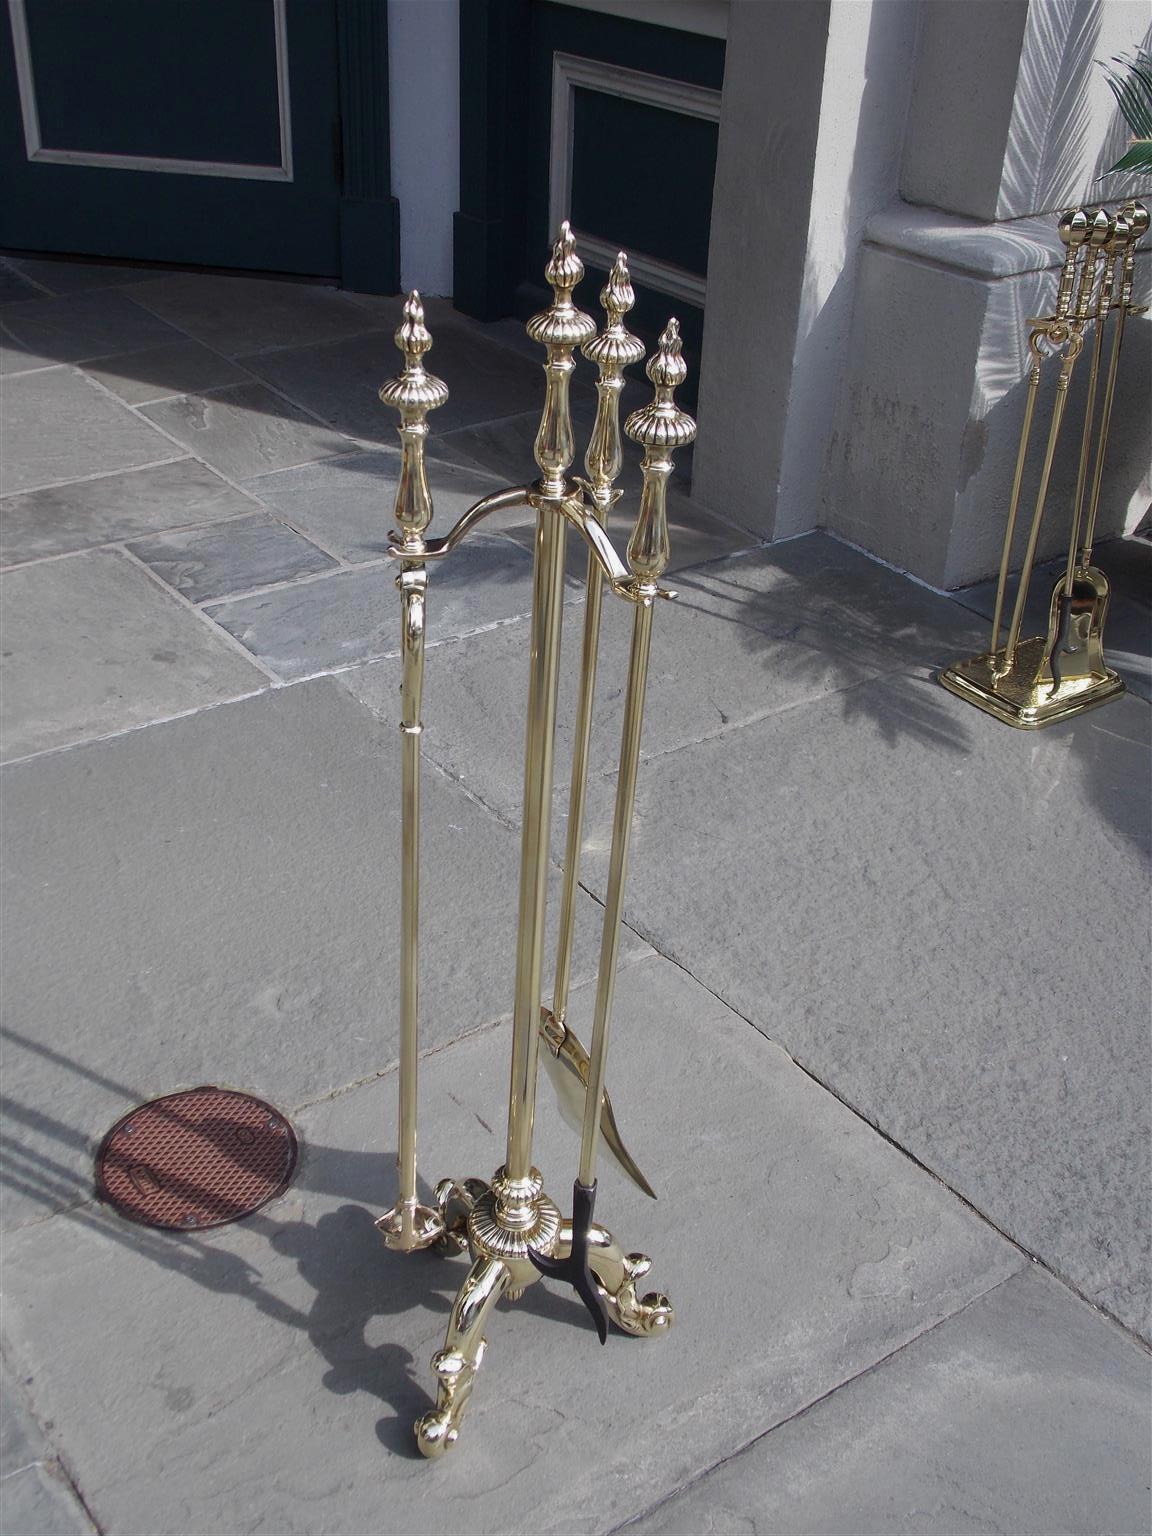 Set of three English brass fire tools on stand with flame finials, bulbous melon handles, circular centered melon column, and resting on three decorative scrolled engraved feet. Set consist of shovel, tong, and poker, Mid-19th century.